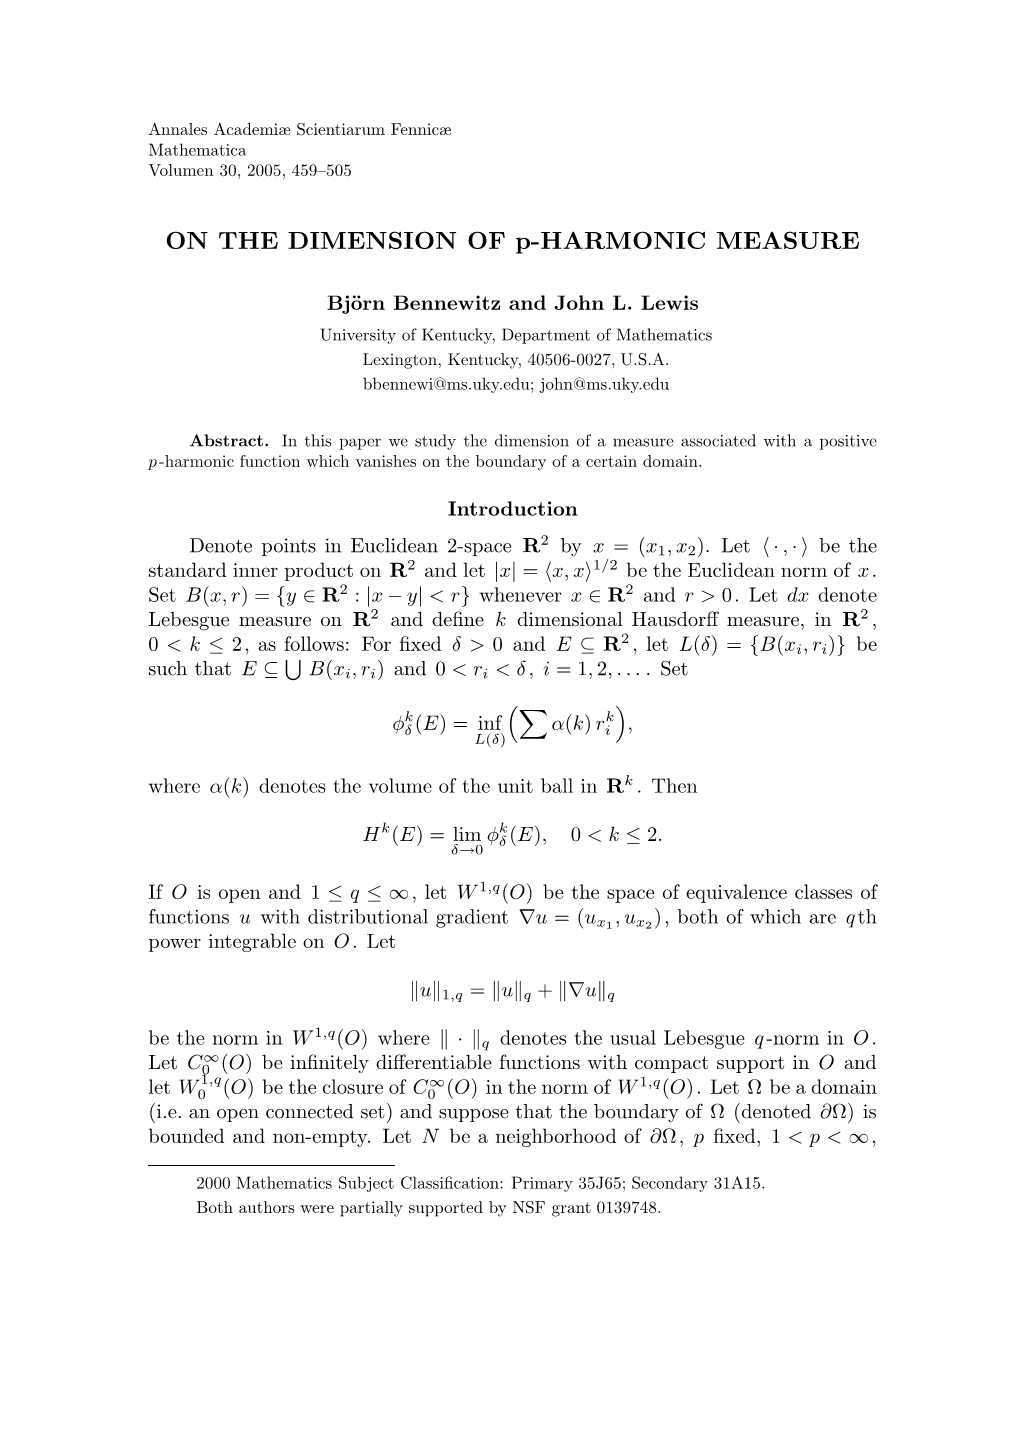 ON the DIMENSION of P-HARMONIC MEASURE